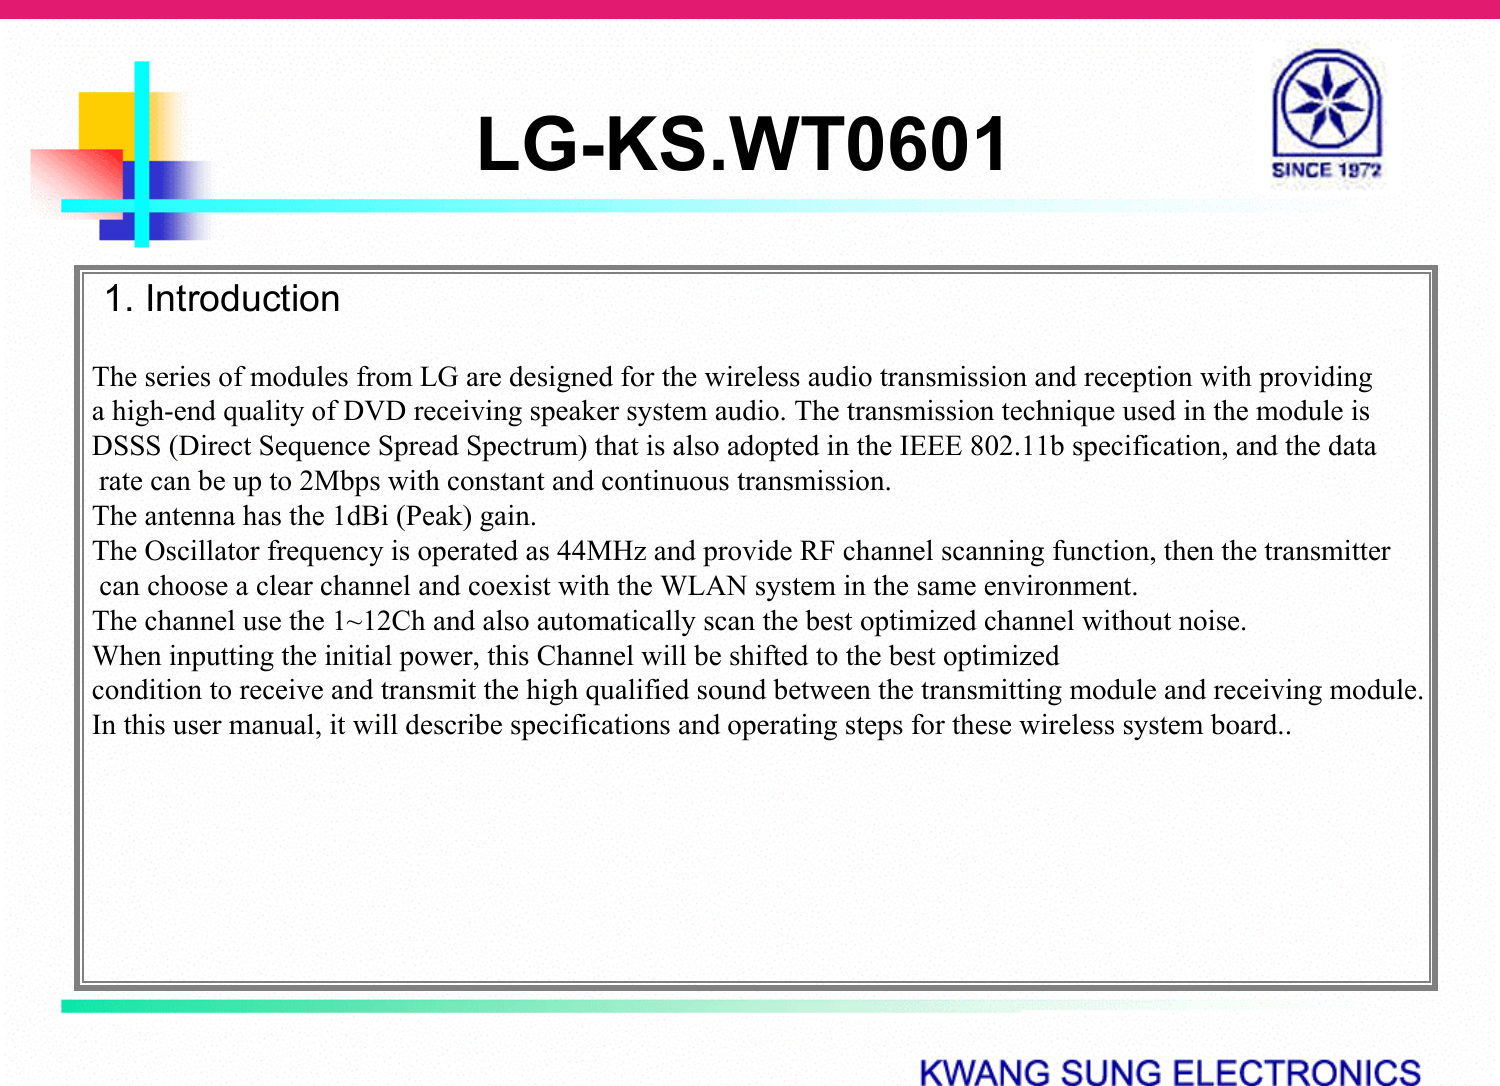 LG-KS.WT06011. IntroductionThe series of modules from LG are designed for the wireless audio transmission and reception with providing a high-end quality of DVD receiving speaker system audio. The transmission technique used in the module is DSSS (Direct Sequence Spread Spectrum) that is also adopted in the IEEE 802.11b specification, and the datarate can be up to 2Mbps with constant and continuous transmission.The antenna has the 1dBi (Peak) gain.The Oscillator frequency is operated as 44MHz and provide RF channel scanning function, then the transmittercan choose a clear channel and coexist with the WLAN system in the same environment.The channel use the 1~12Ch and also automatically scan the best optimized channel without noise.  When inputting the initial power, this Channel will be shifted to the best optimized condition to receive and transmit the high qualified sound between the transmitting module and receiving module. In this user manual, it will describe specifications and operating steps for these wireless system board..